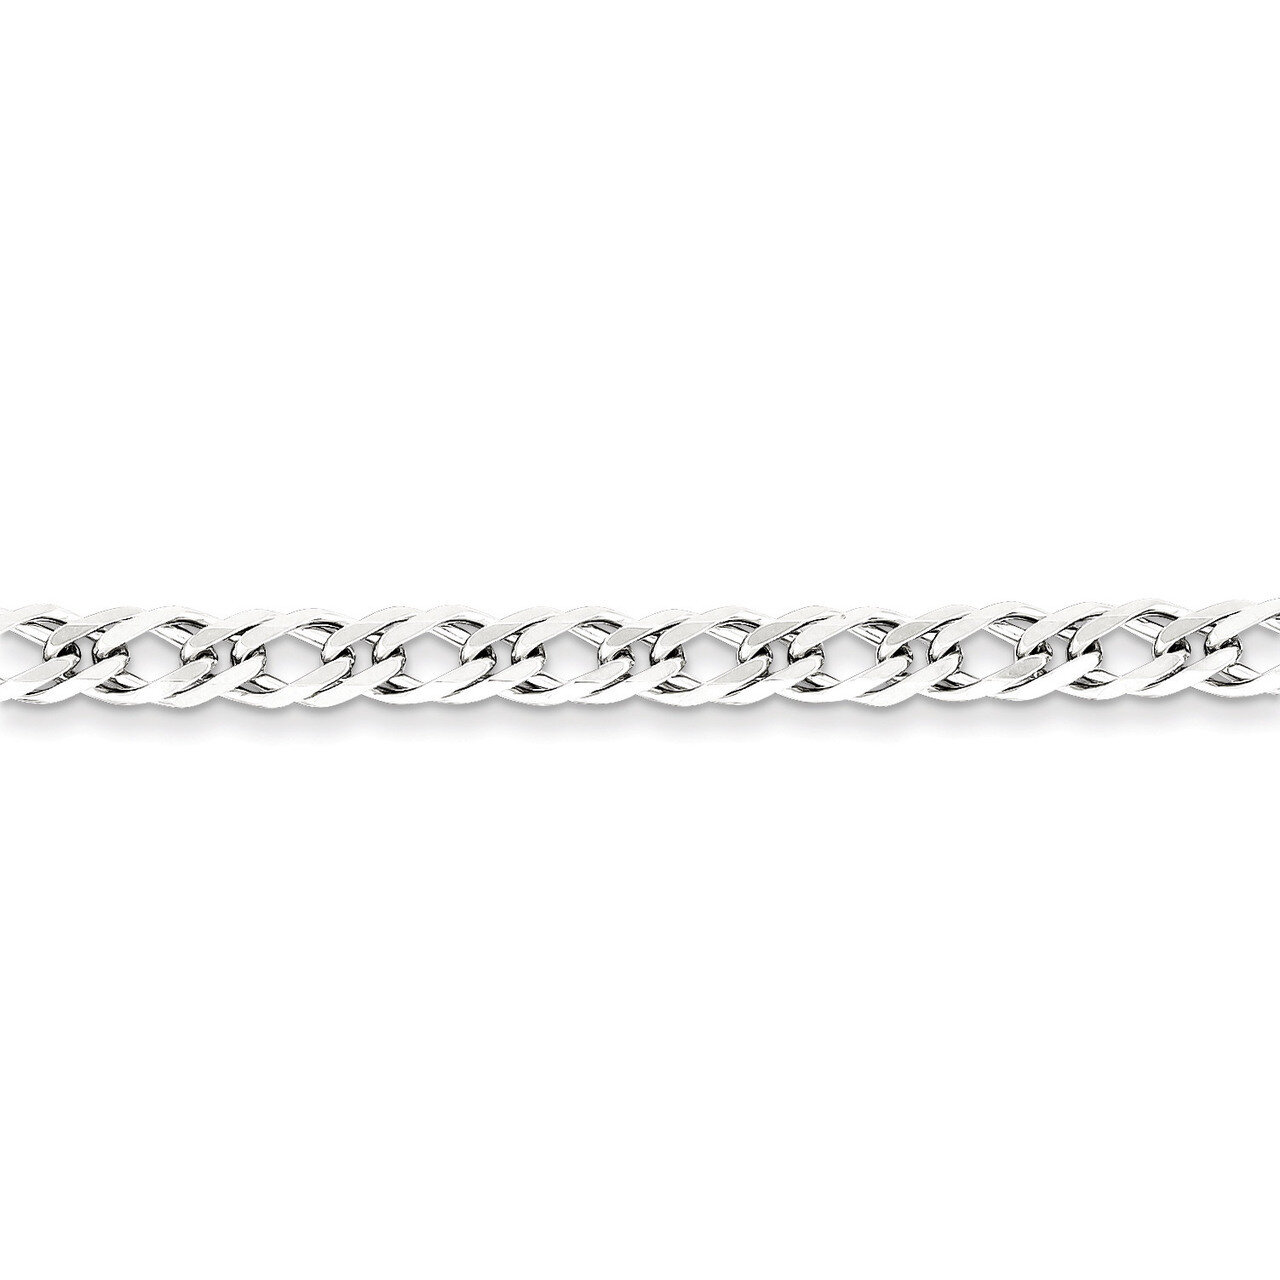 8 Inch 5.25mm Double 6 Side Diamond Cut Flat Link Curb Chain Sterling Silver QFC153-8